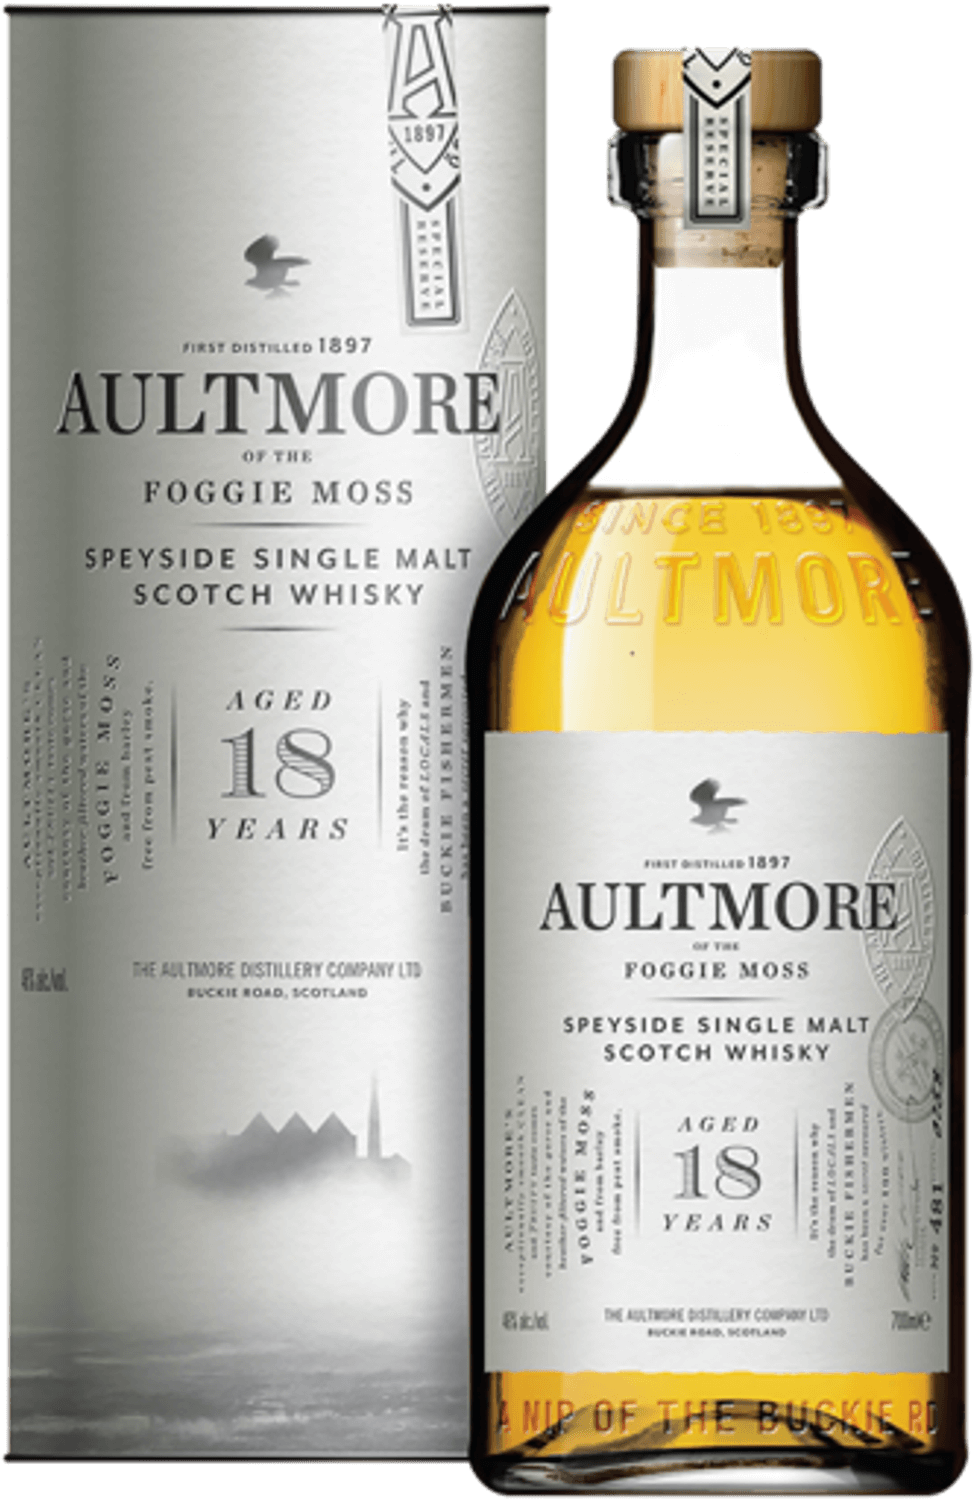 Aultmore 18 Years Old Speyside Single Malt Scotch Whisky (gift box) glenfiddich 18 years old single malt scotch whisky gift box